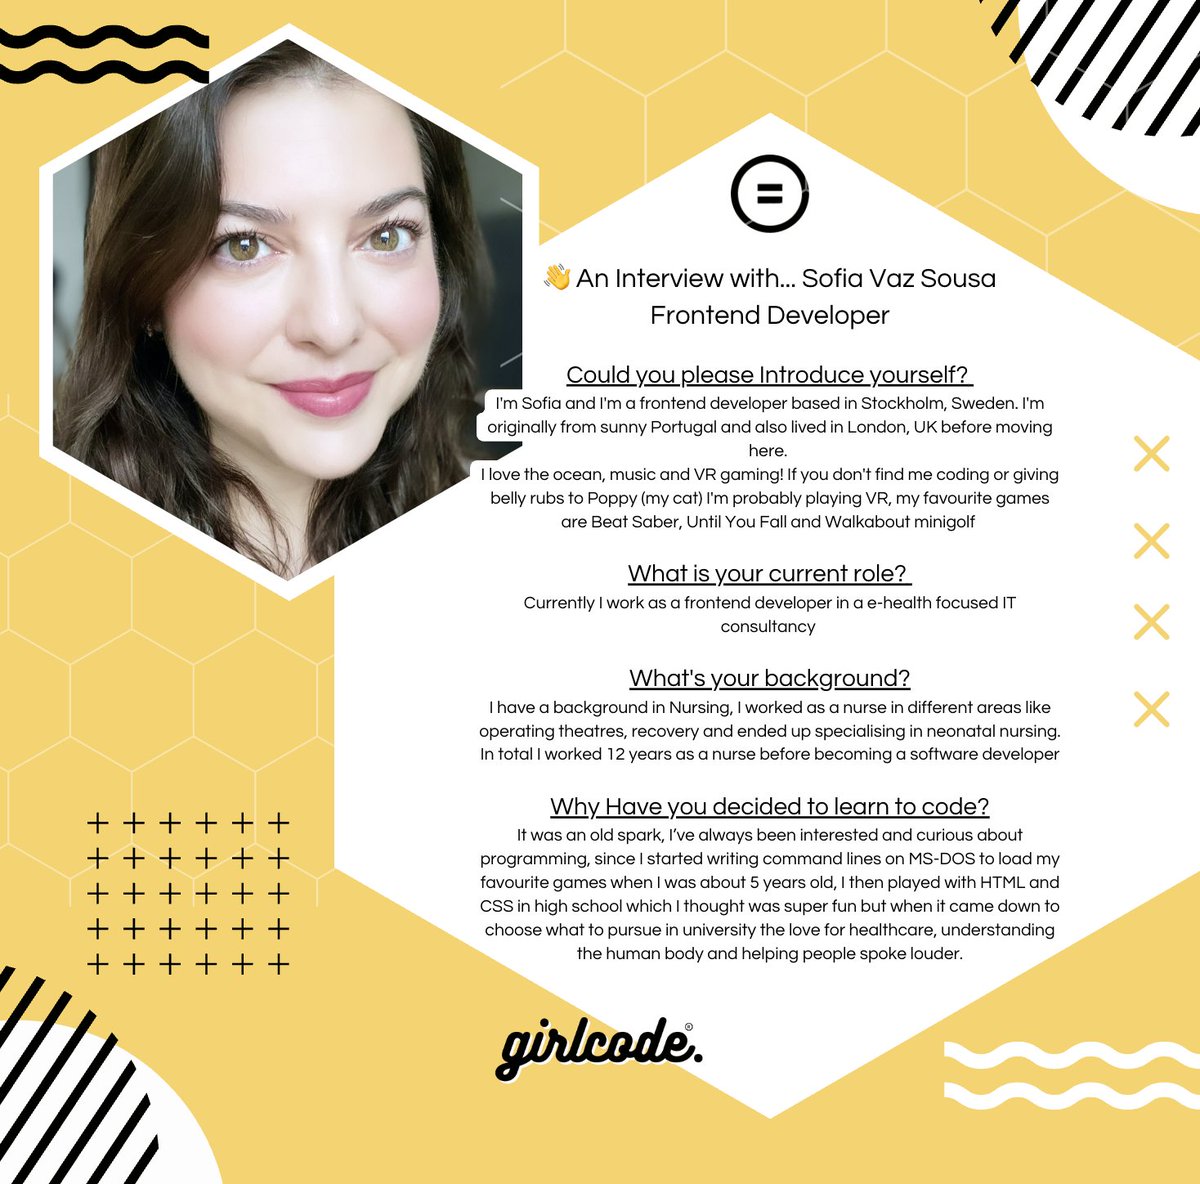 👋 An Interview with Sofia Vaz Sousa - Frontend Developer based in Sweden! Thank you for your time Sofia and welcome to the team! lnkd.in/etXr2GBw

#team #thankyou #community #news #newsletter #girlcode #womenintech #womenintechnology #womenengineers @ChorusAB